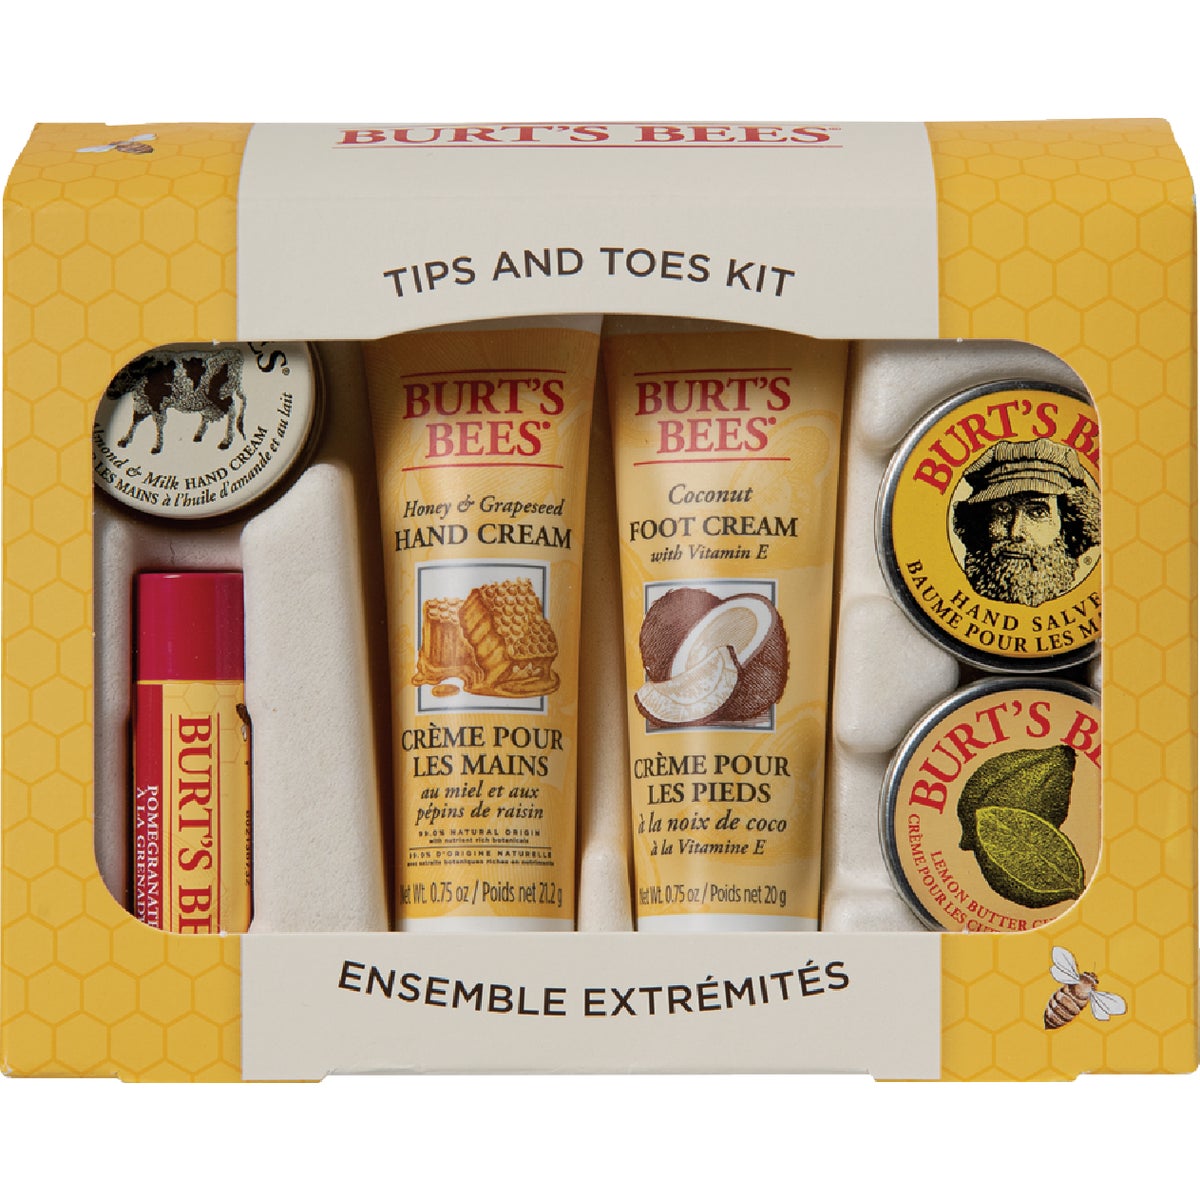 Burt's Bees Tips & Toes Kit (6-Count)